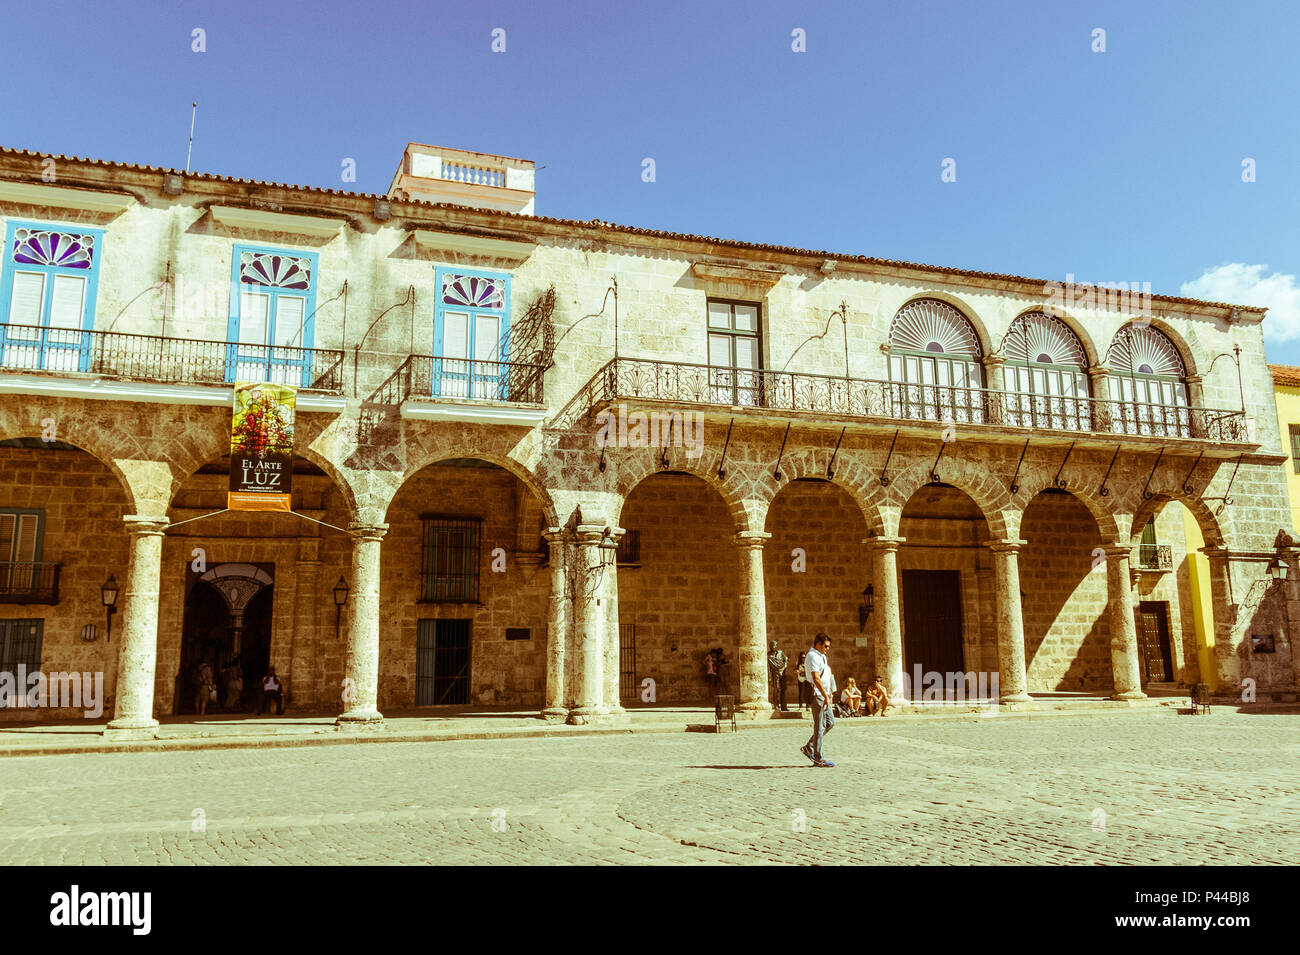 HAVANA, CUBA - JANUARY 16, 2017: Arcades of the Palace of the Conde Lombillo. in the Cathedral Square, Old Havana, Cuba. Image with vintage and yester Stock Photo